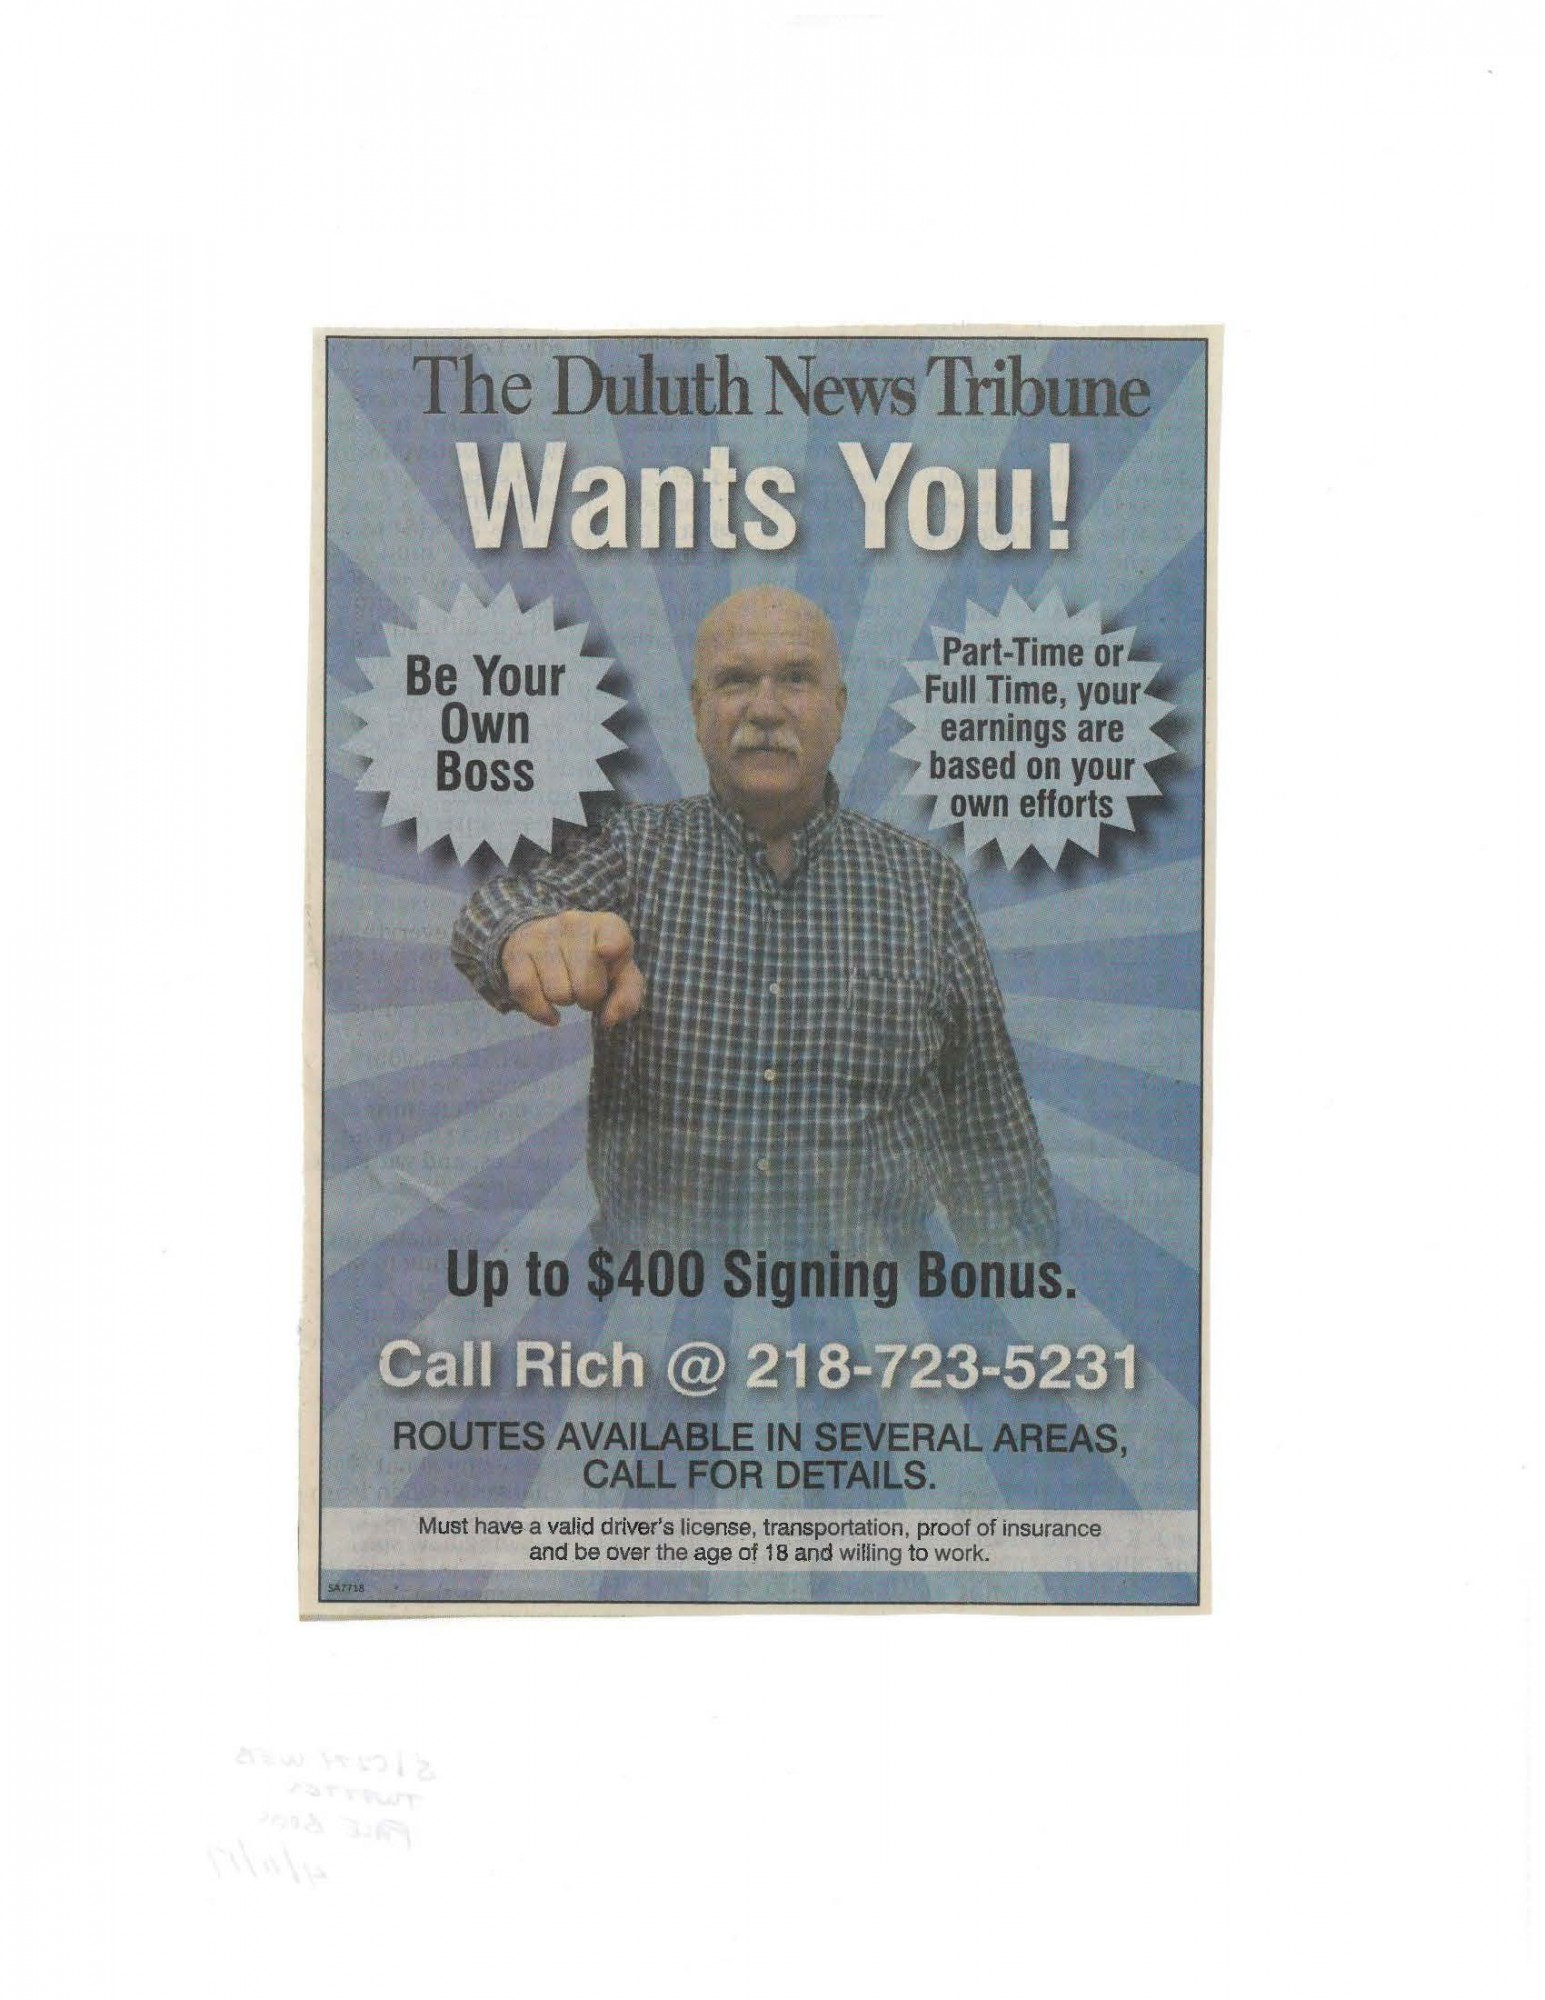 Idea #34 of 50 Days of Ideas! THE DULUTH NEWS TRIBUNE WANTS YOU!